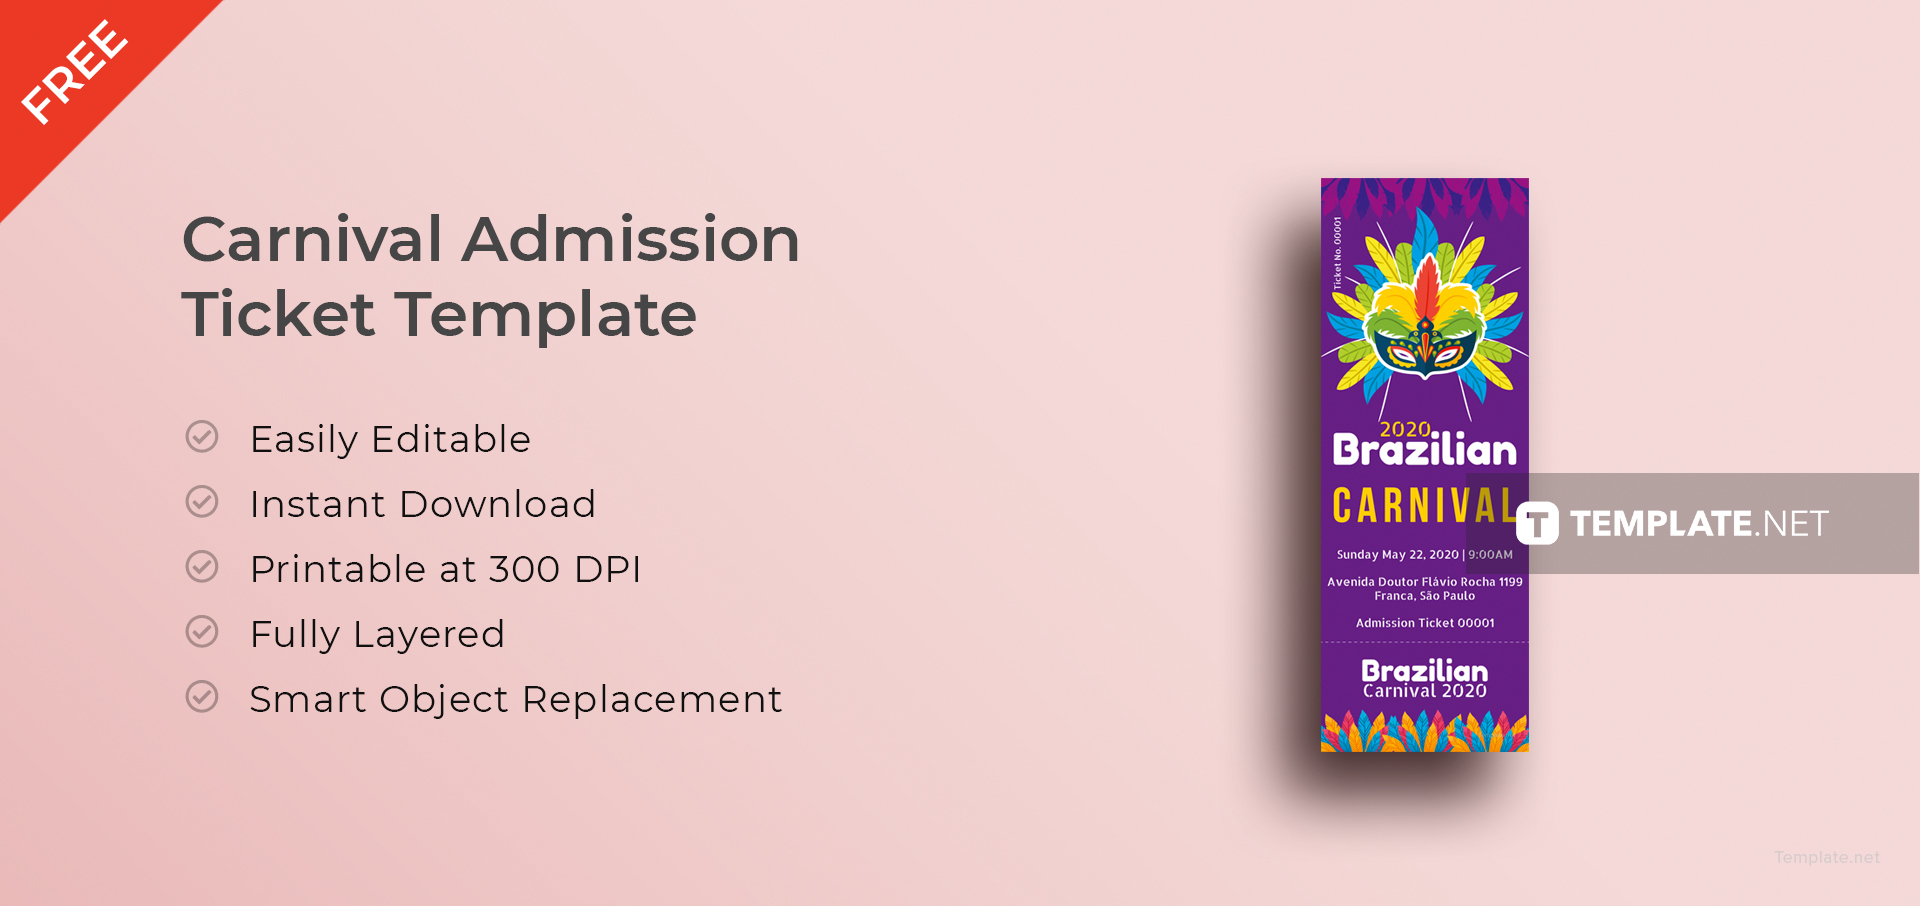 free-carnival-admission-ticket-template-in-adobe-photoshop-microsoft